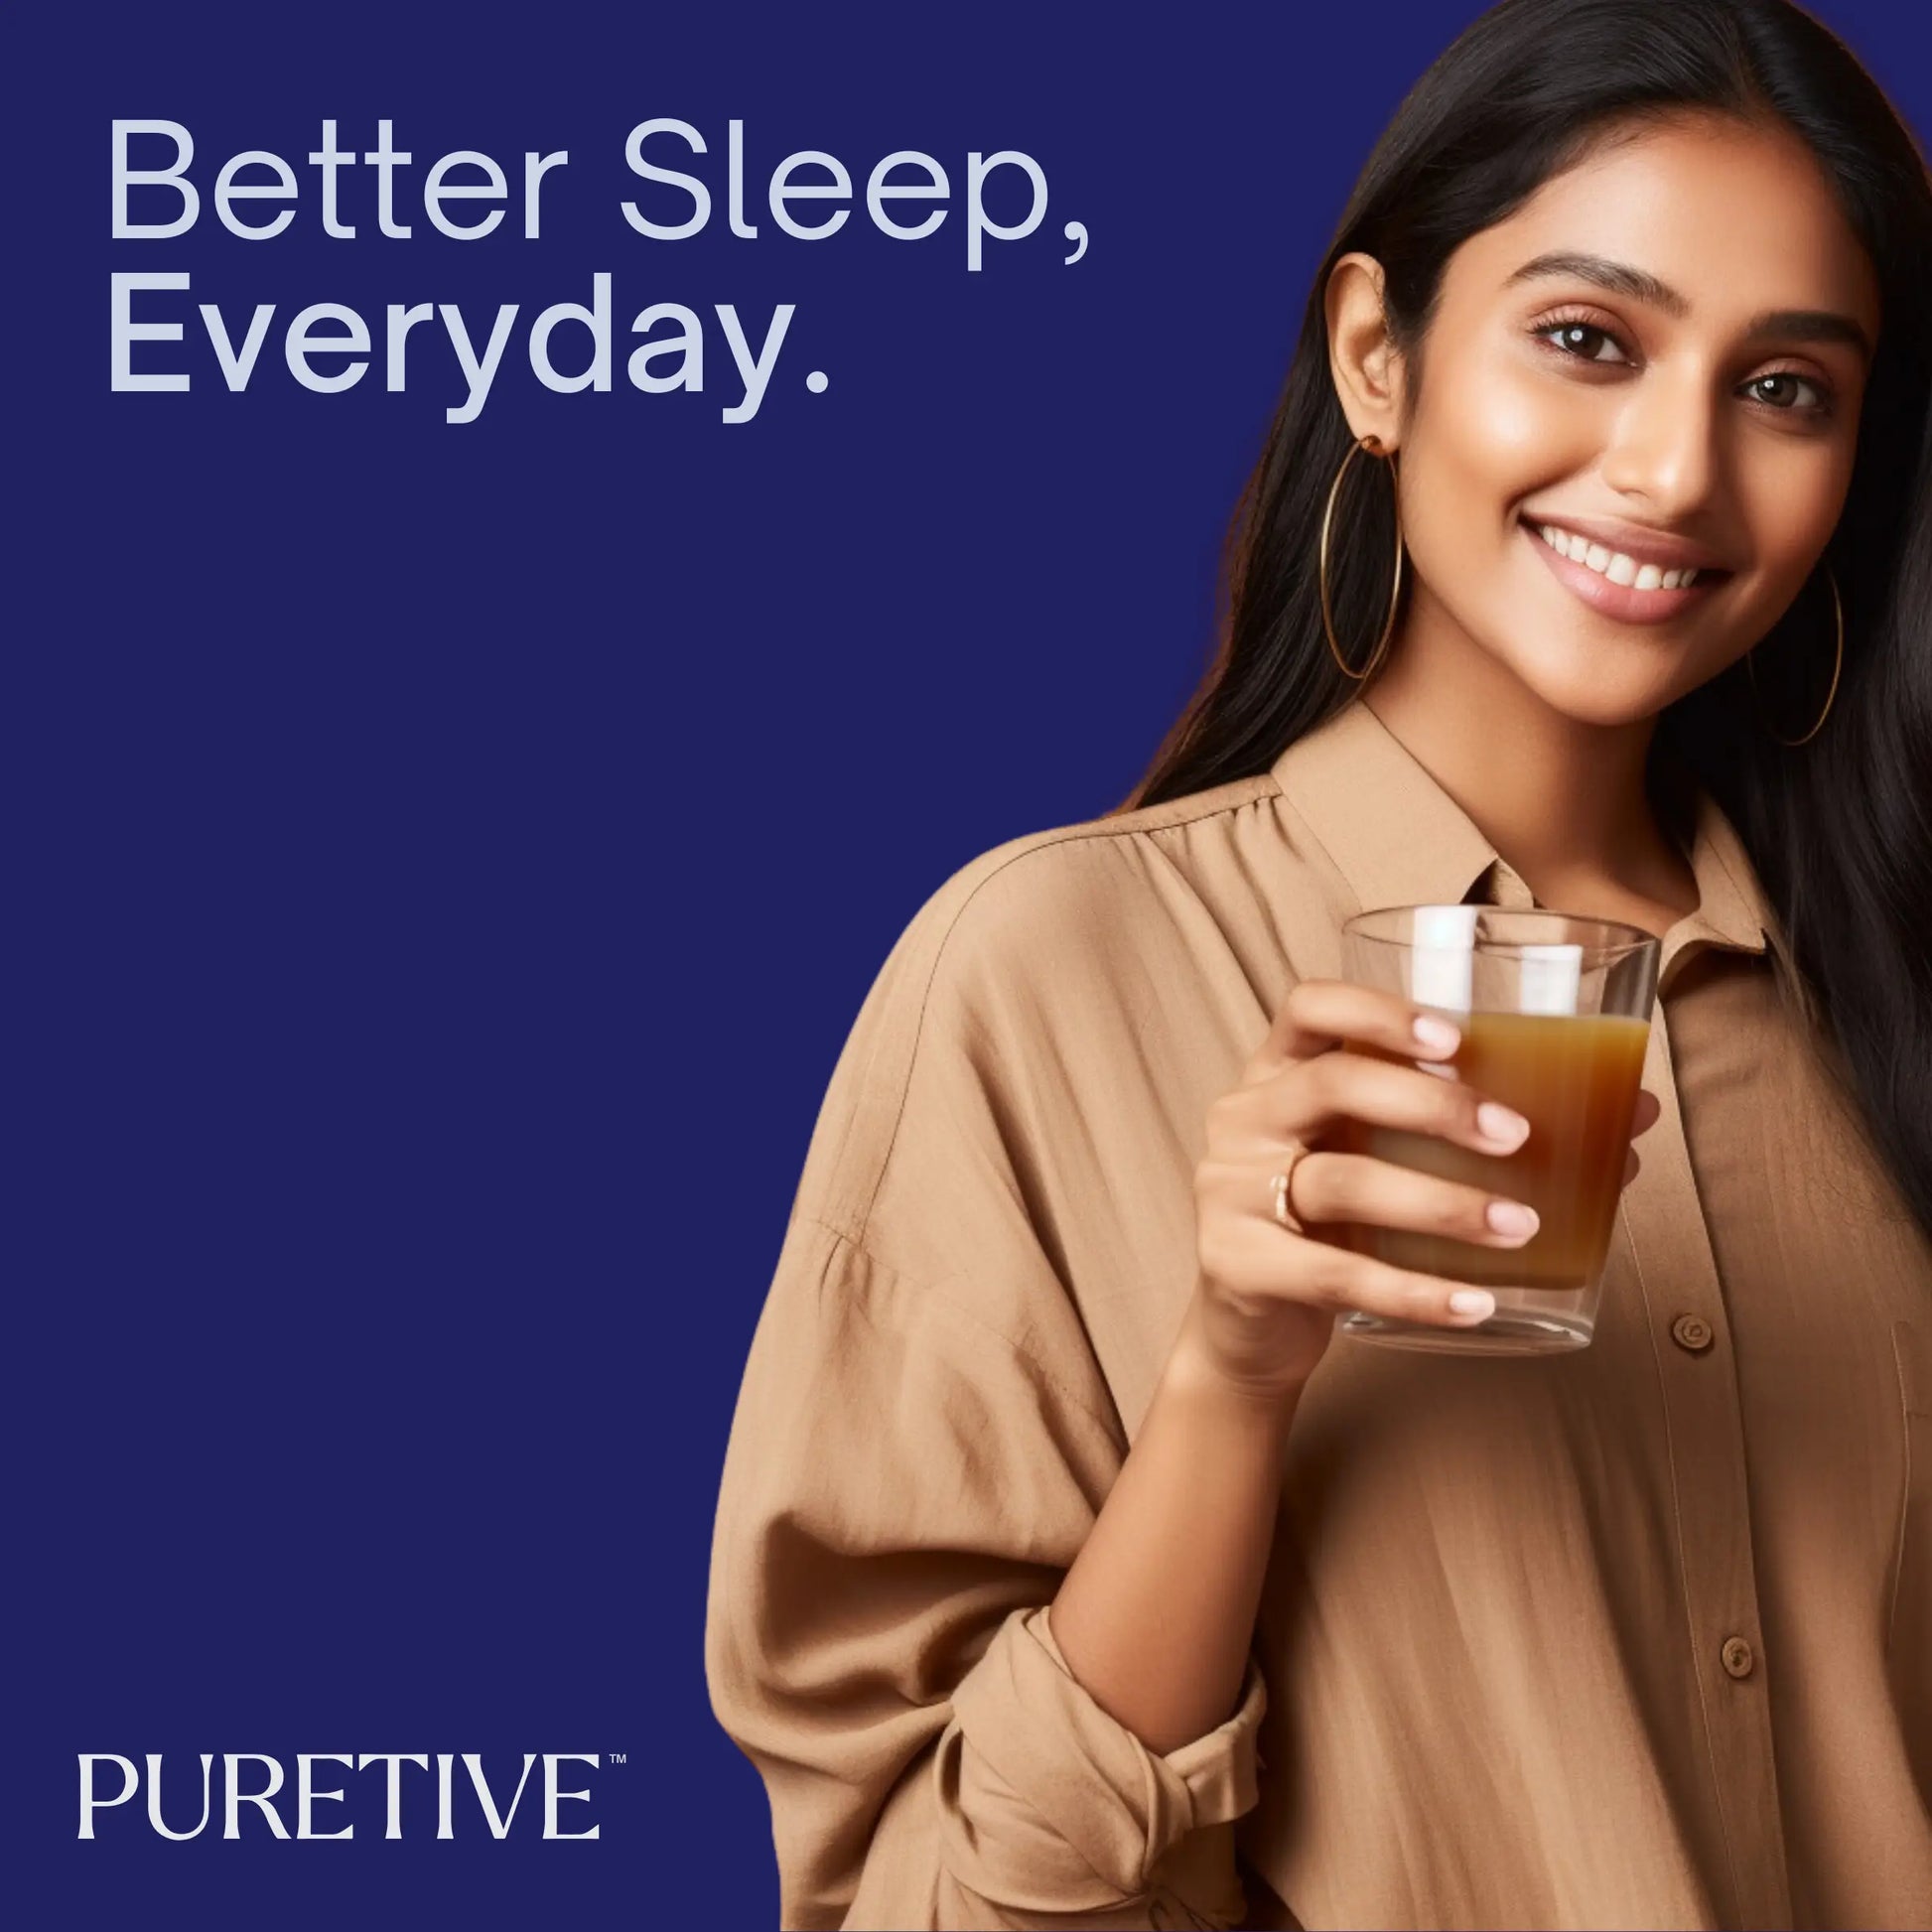 Puretive's Sleep Fix Nutrition Mix with 11 100% Pure superfoods, carefully designed to promote better sleep by addressing stress, hormone balance, and digestion, ultimately restoring your sleep cycle & improving your overall well-being.